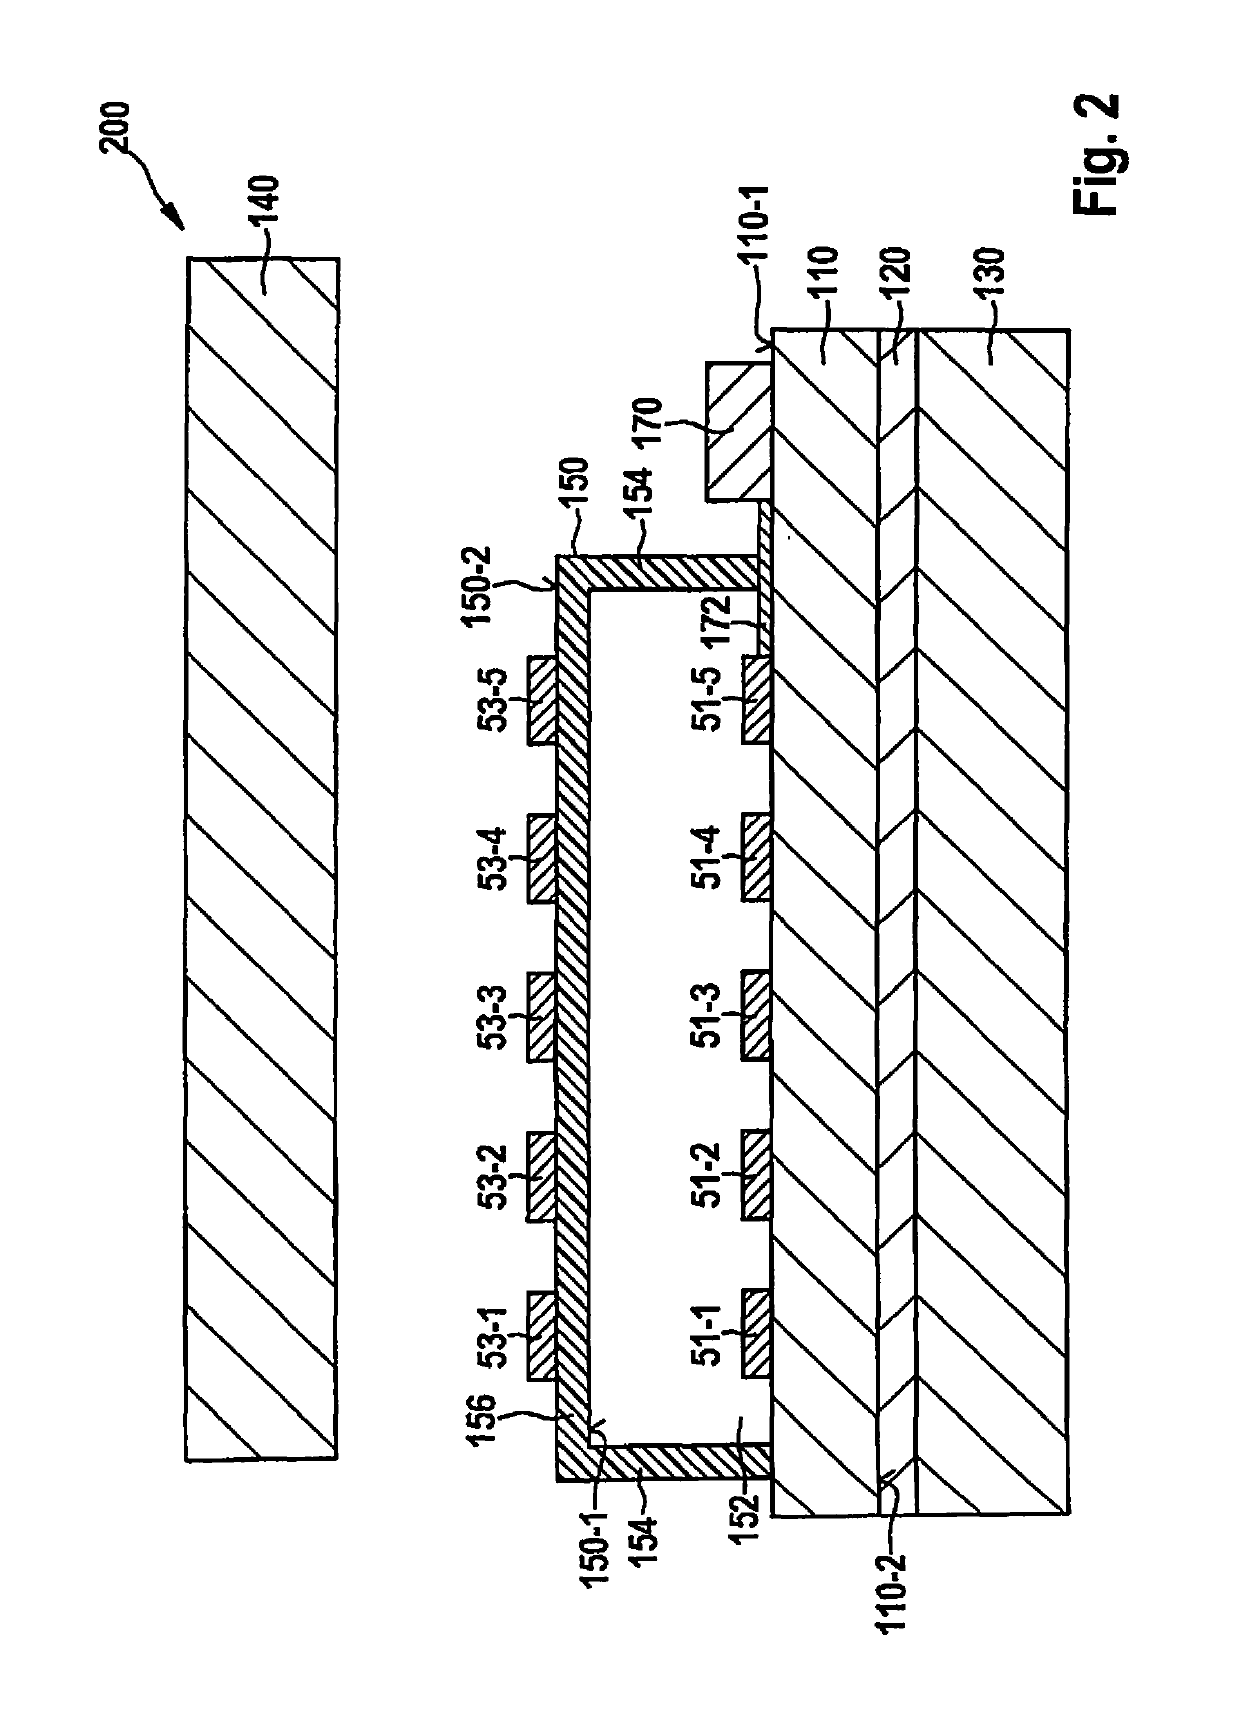 Antenna system and method for manufacturing an antenna system